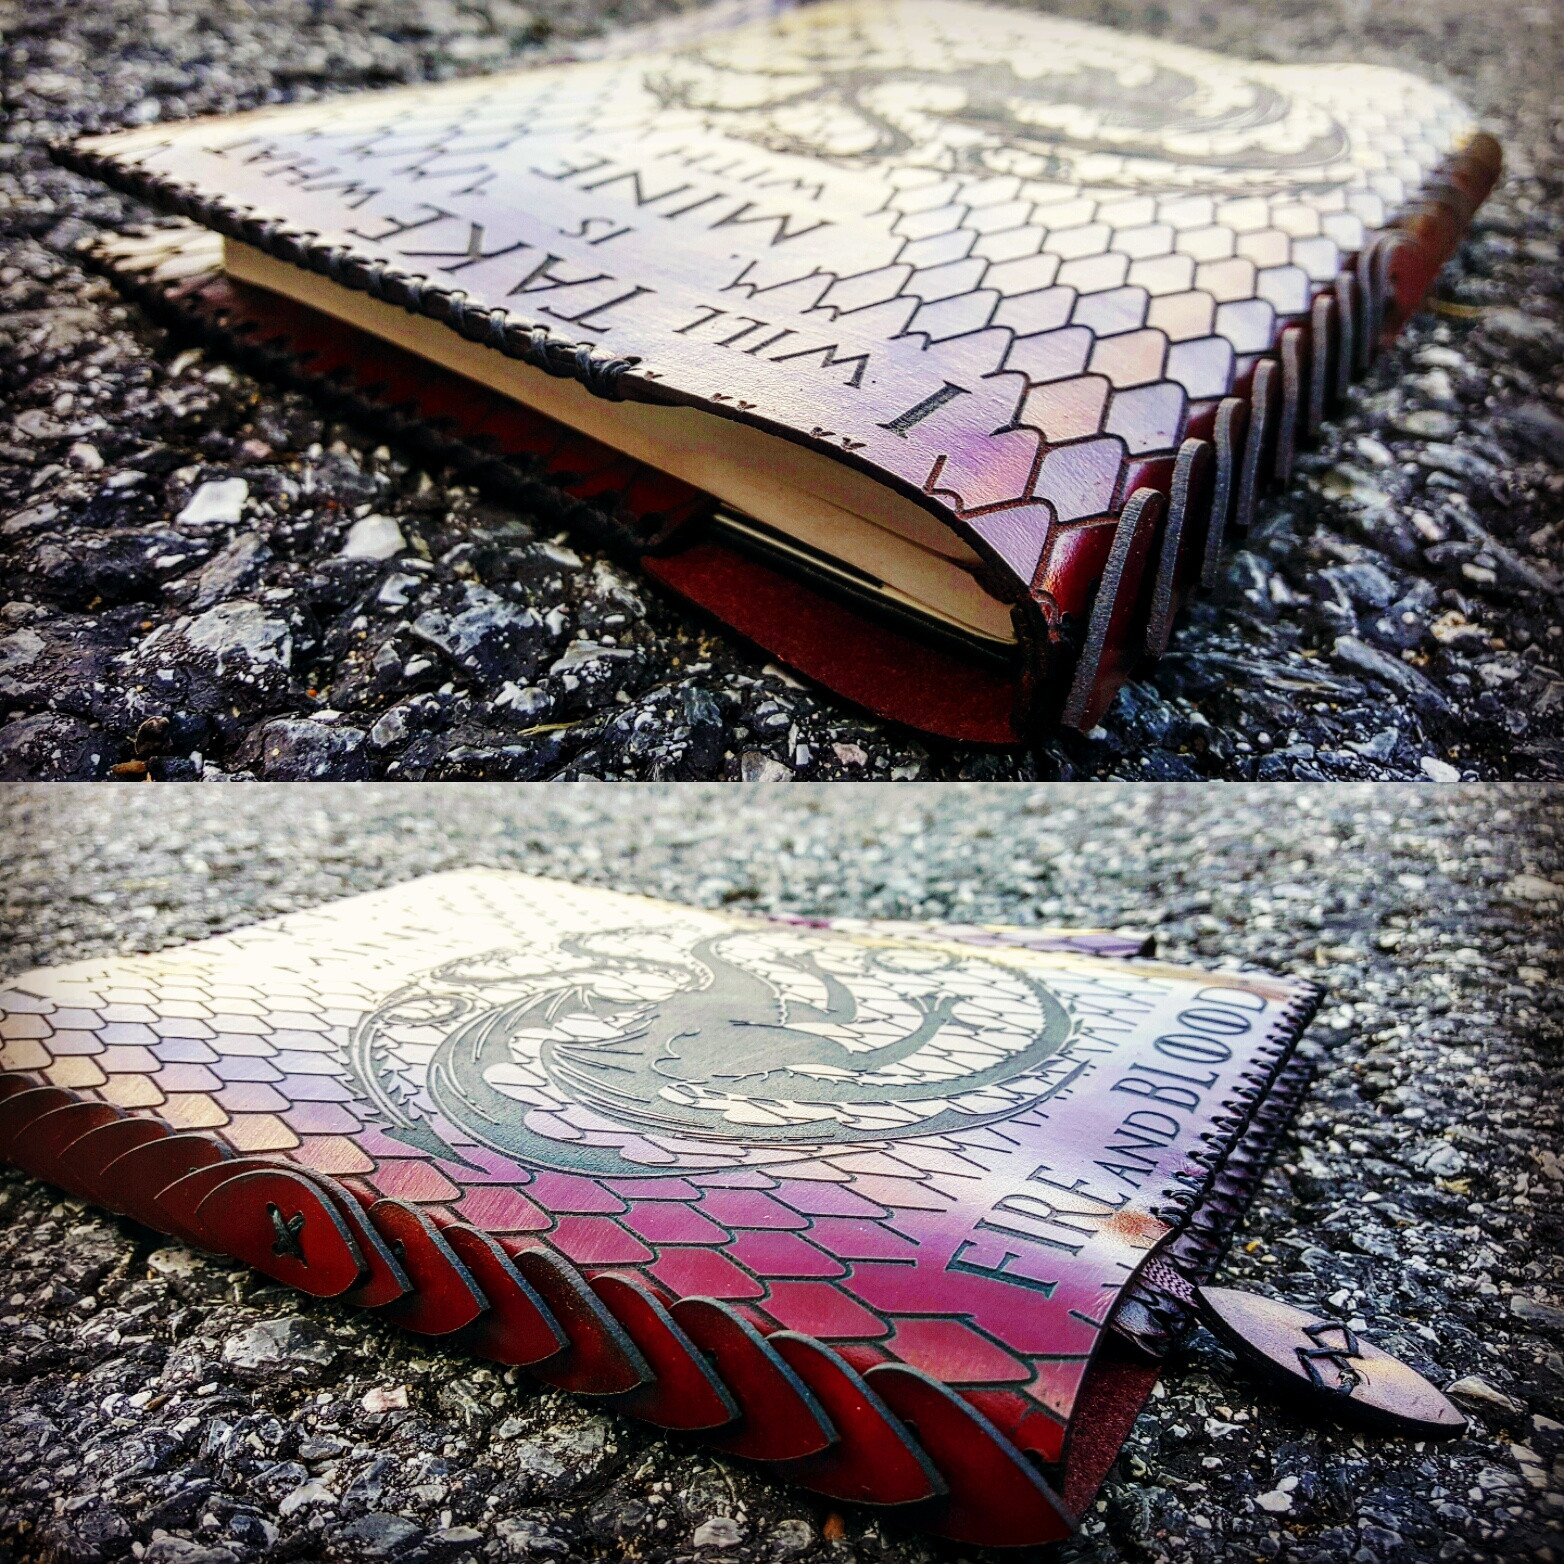 Like this "Dragon Scaled" journal cover...